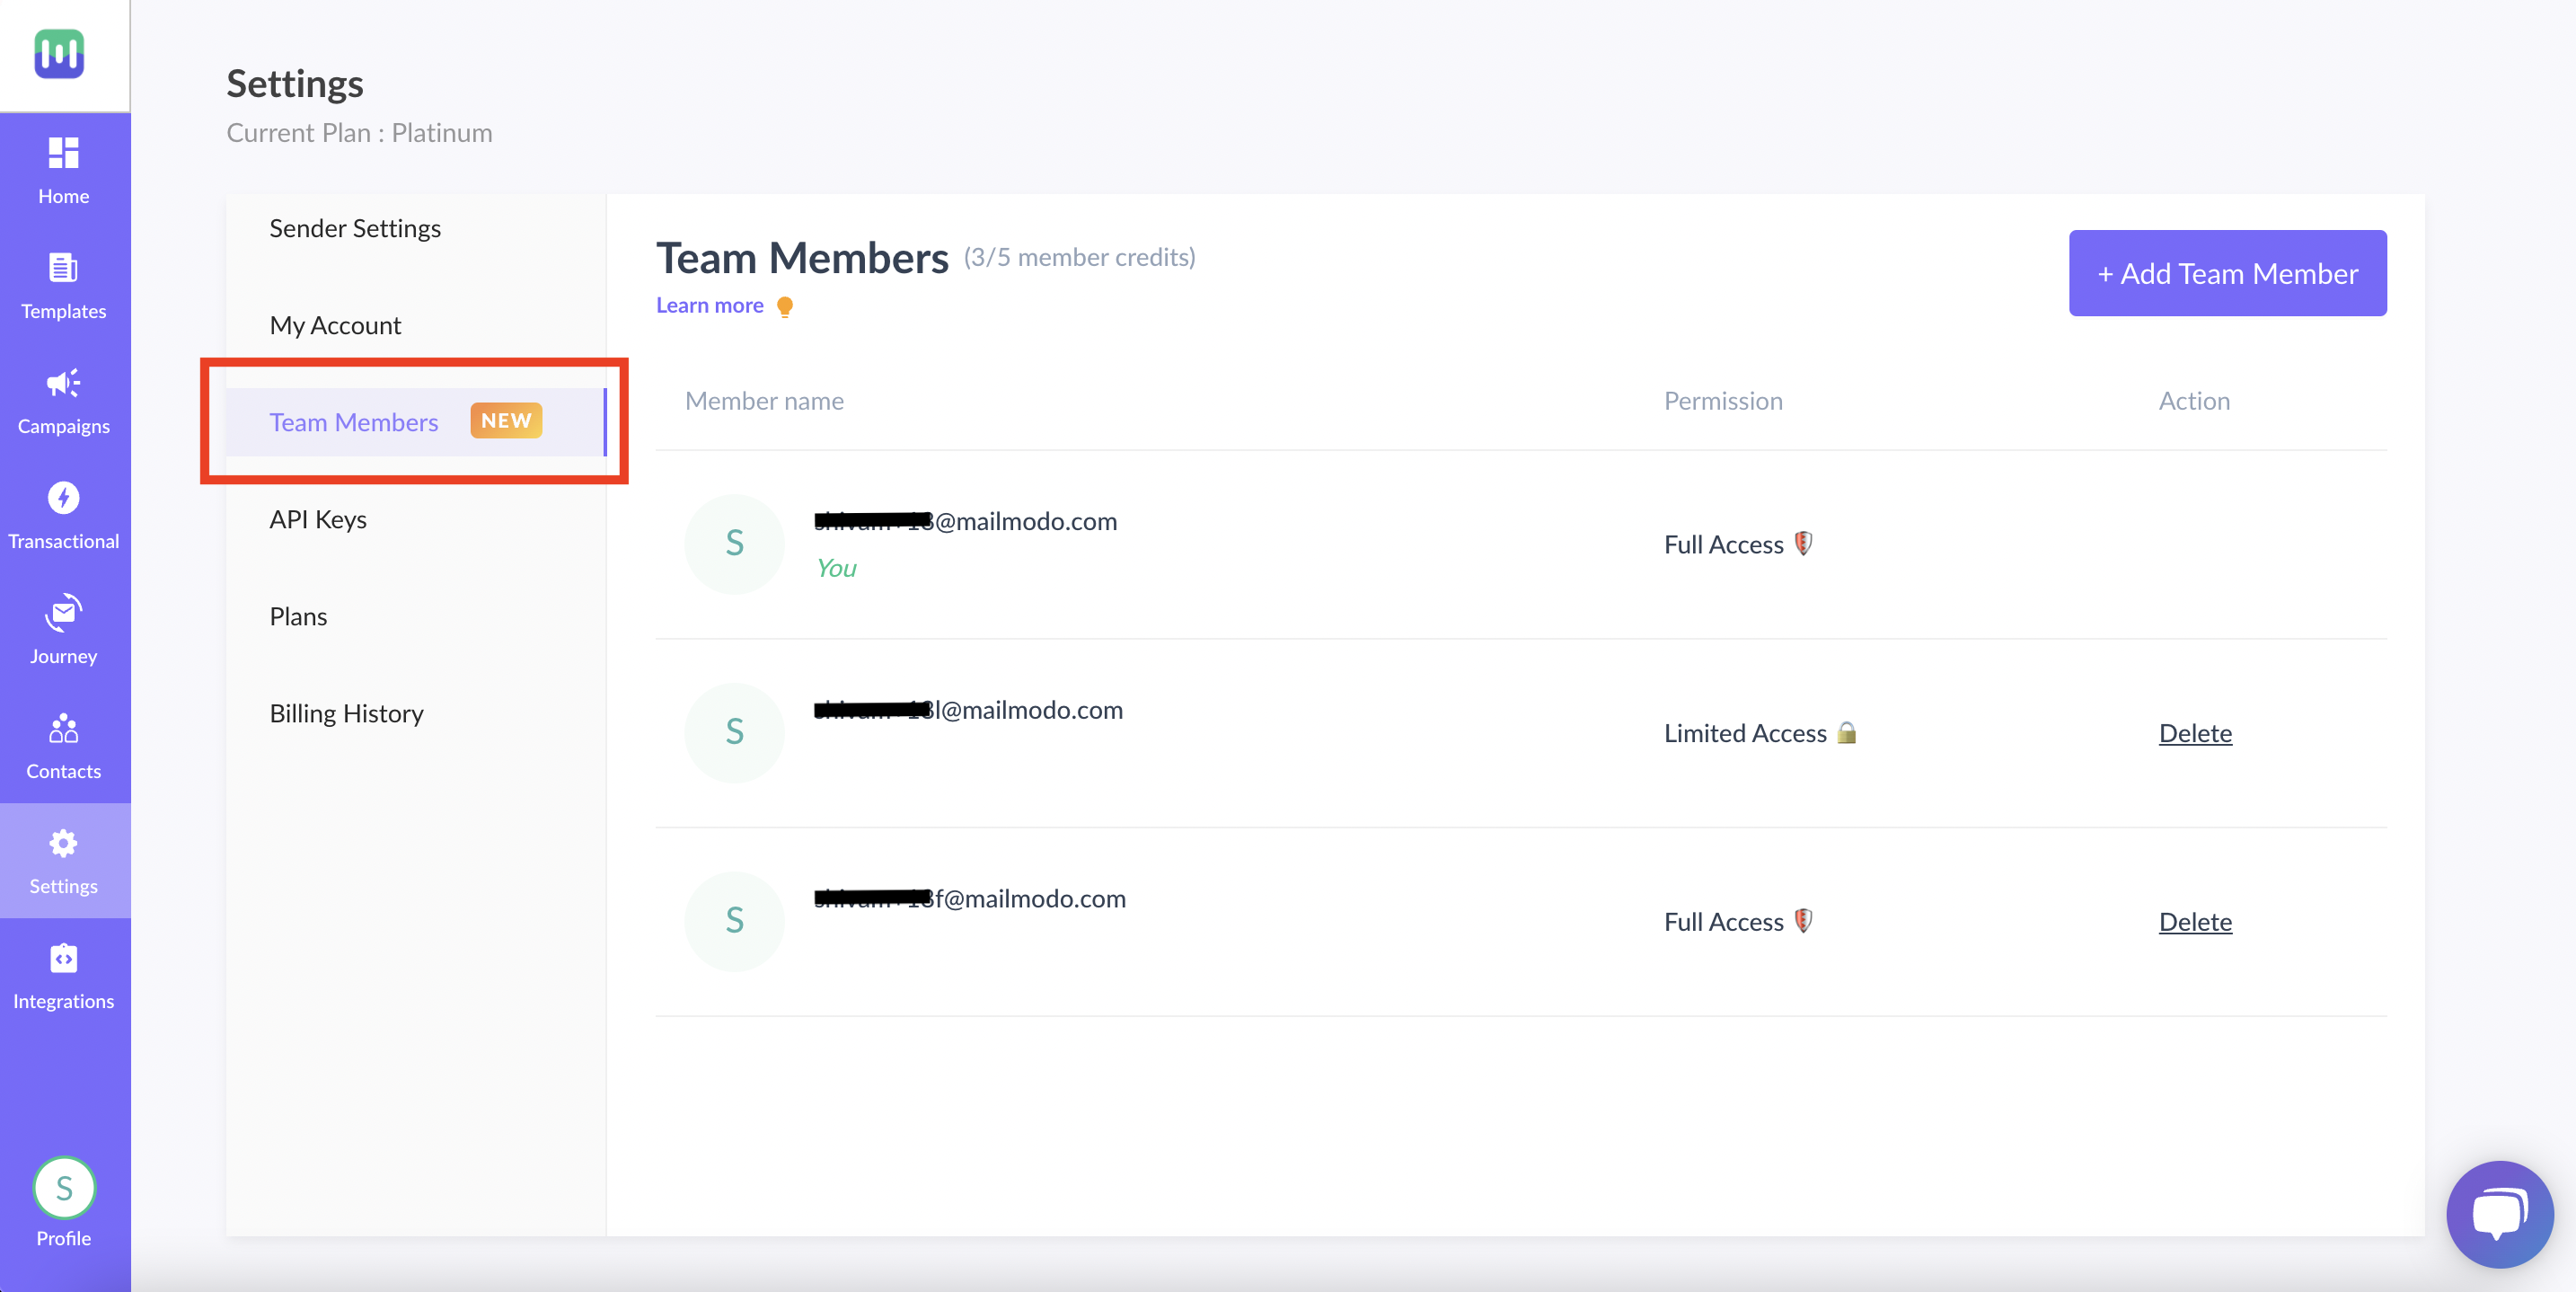 How to add or delete team members from your account?